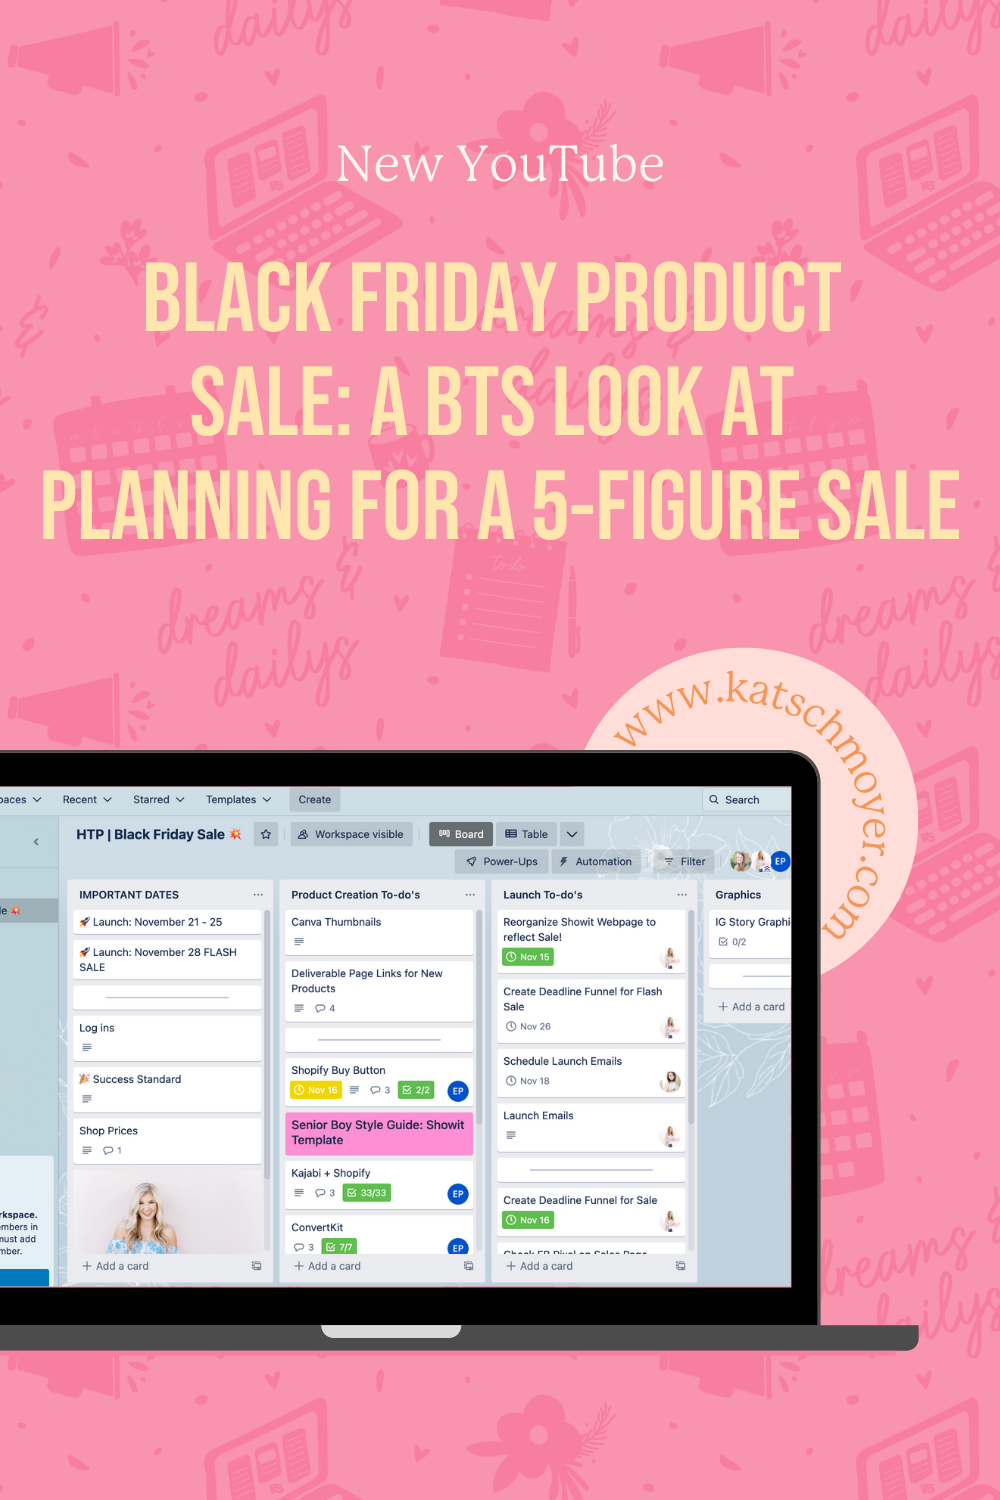 Black Friday Product Sale: A BTS Look at Planning for a 5-figure Sale